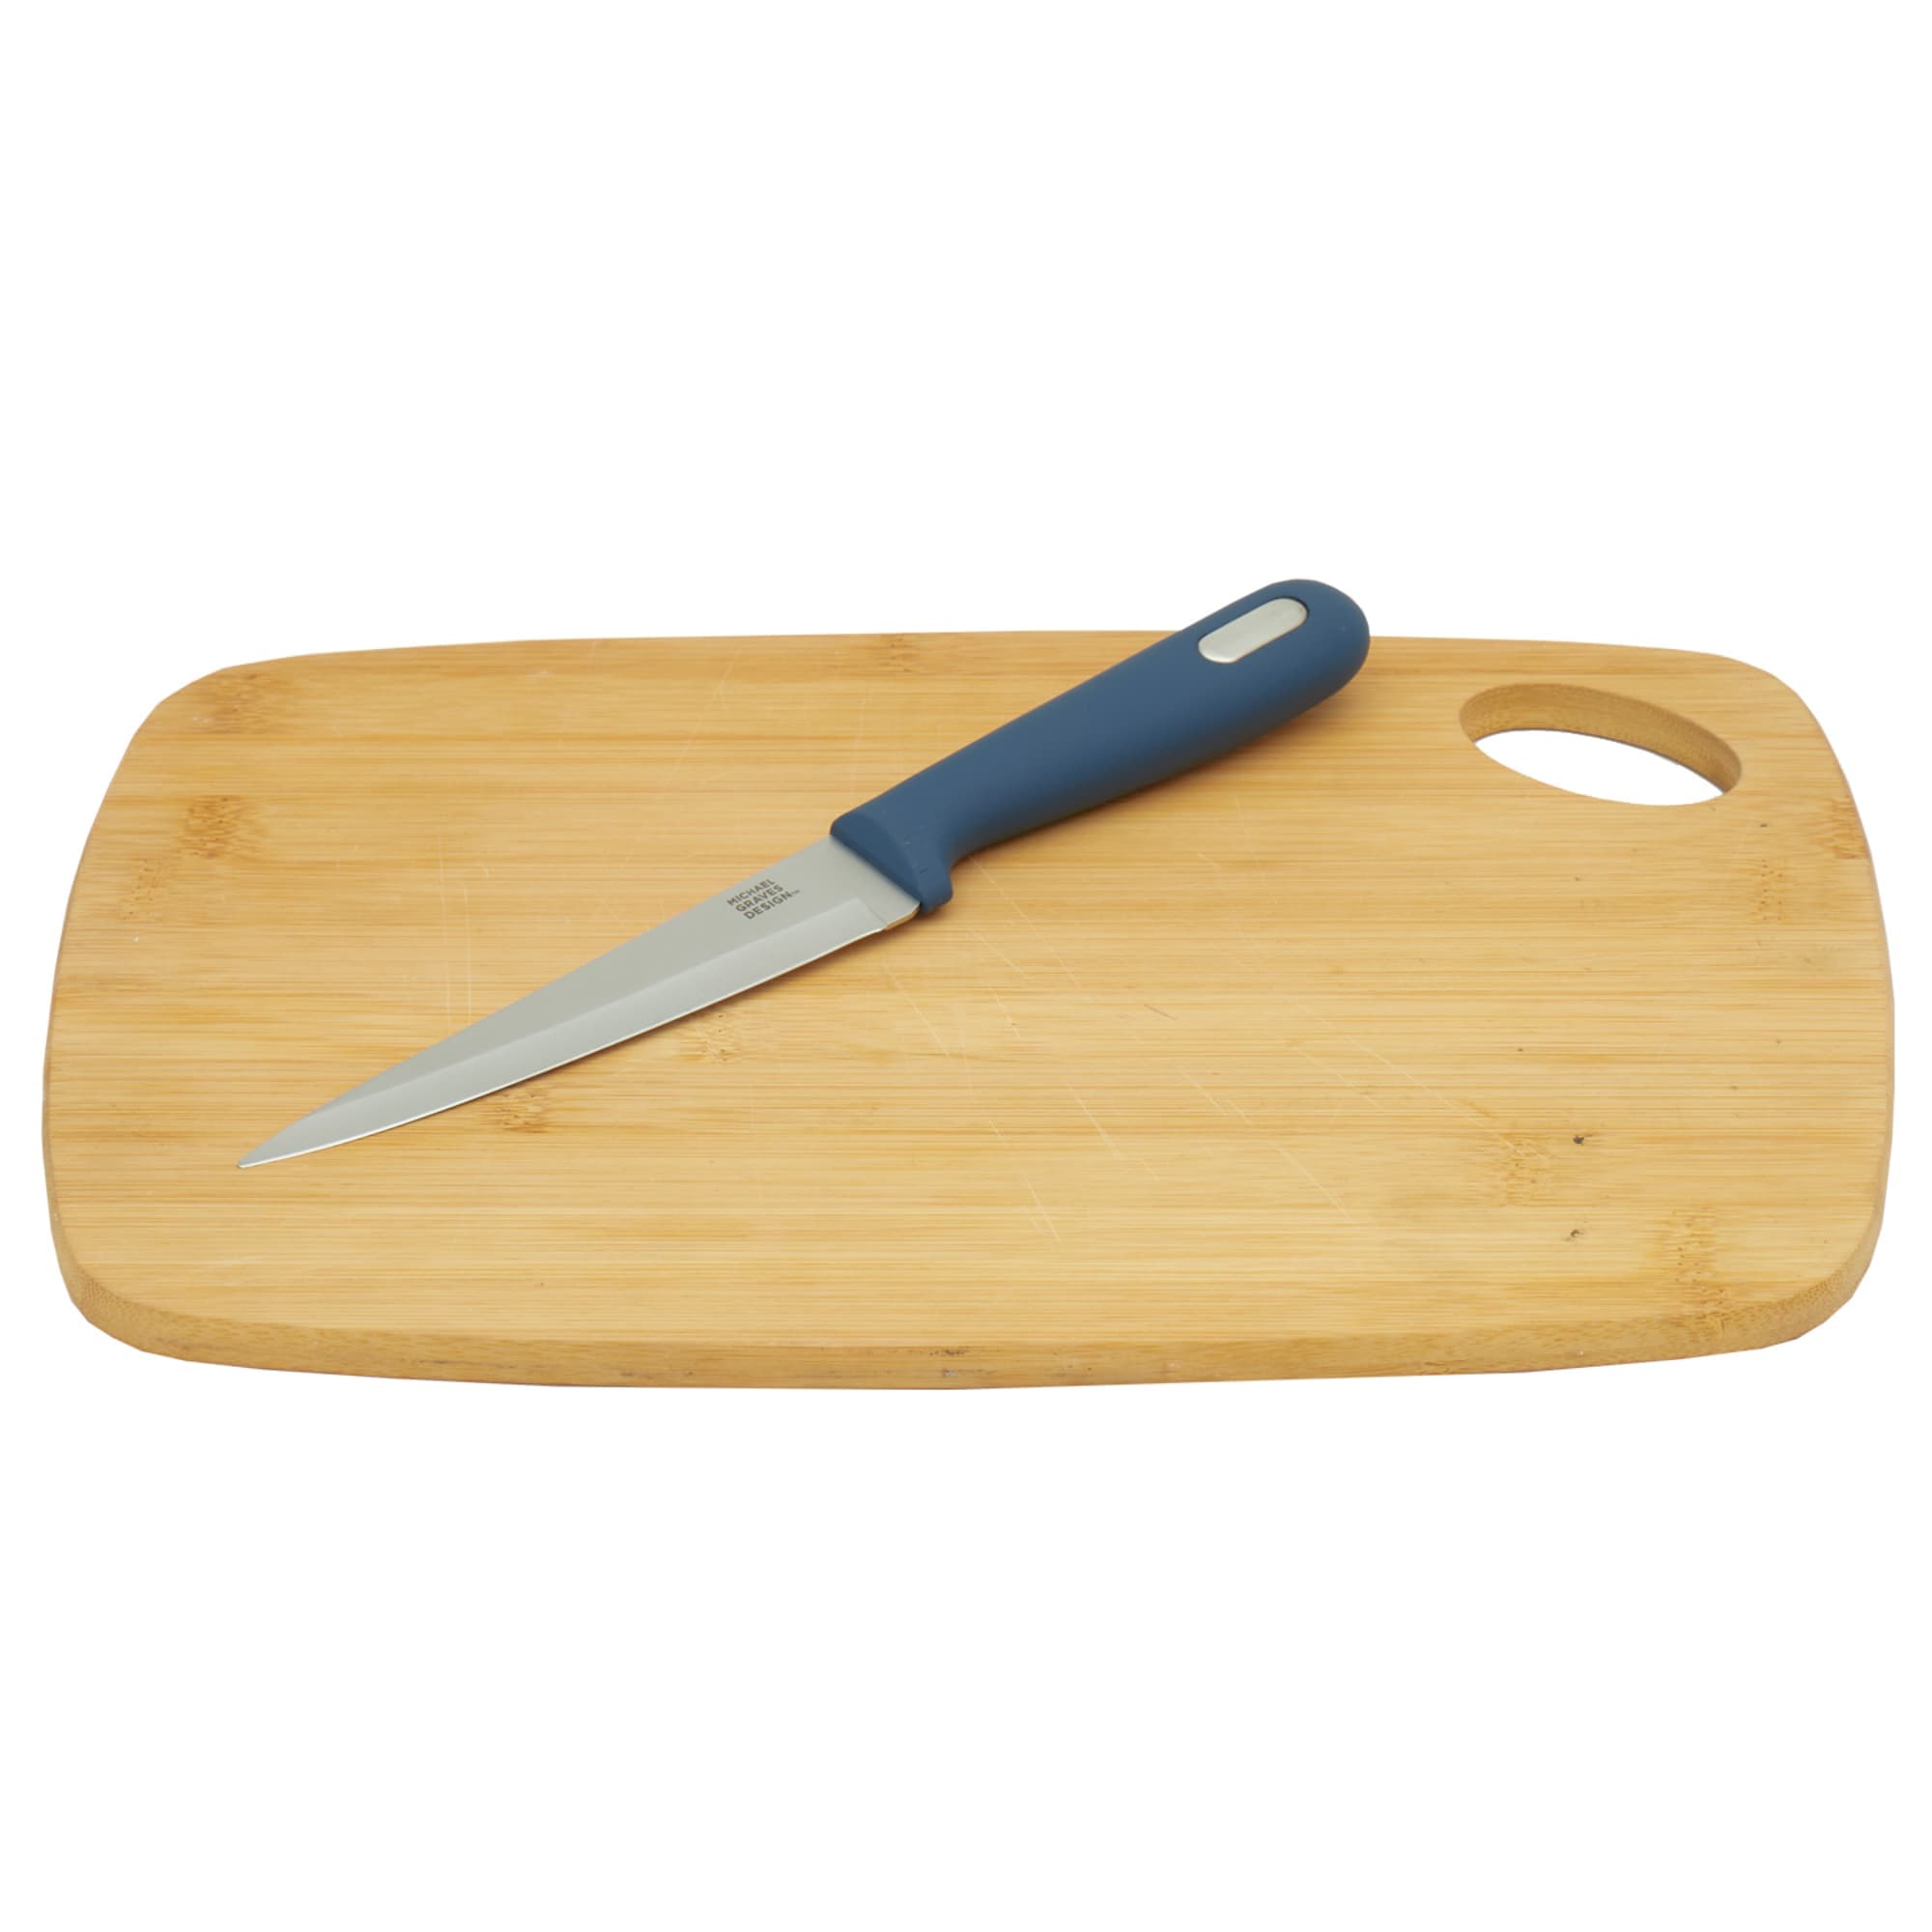 Michael Graves Design Comfortable Grip 5 inch Stainless Steel Utility Knife, Indigo $3.00 EACH, CASE PACK OF 24